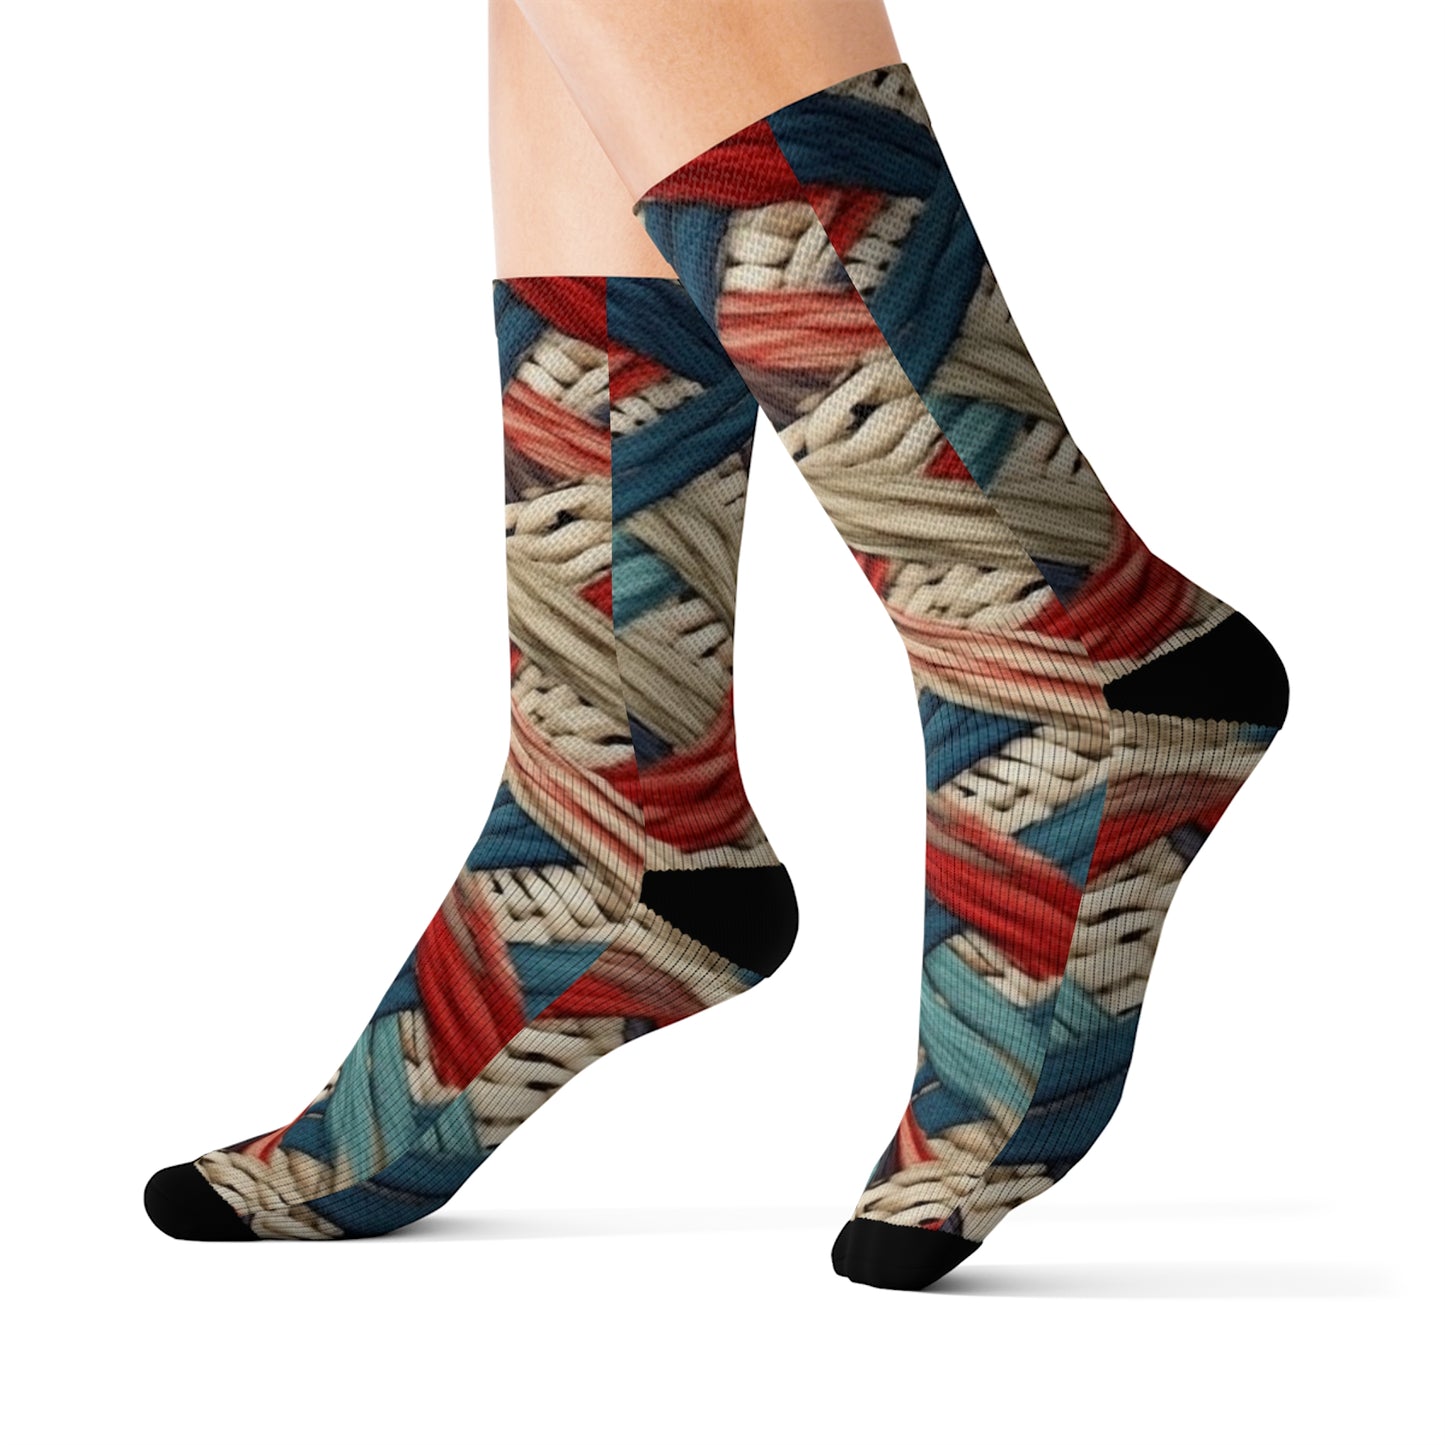 Colorful Yarn Knot: Denim-Inspired Fabric in Red, White, Light Blue - Sublimation Socks